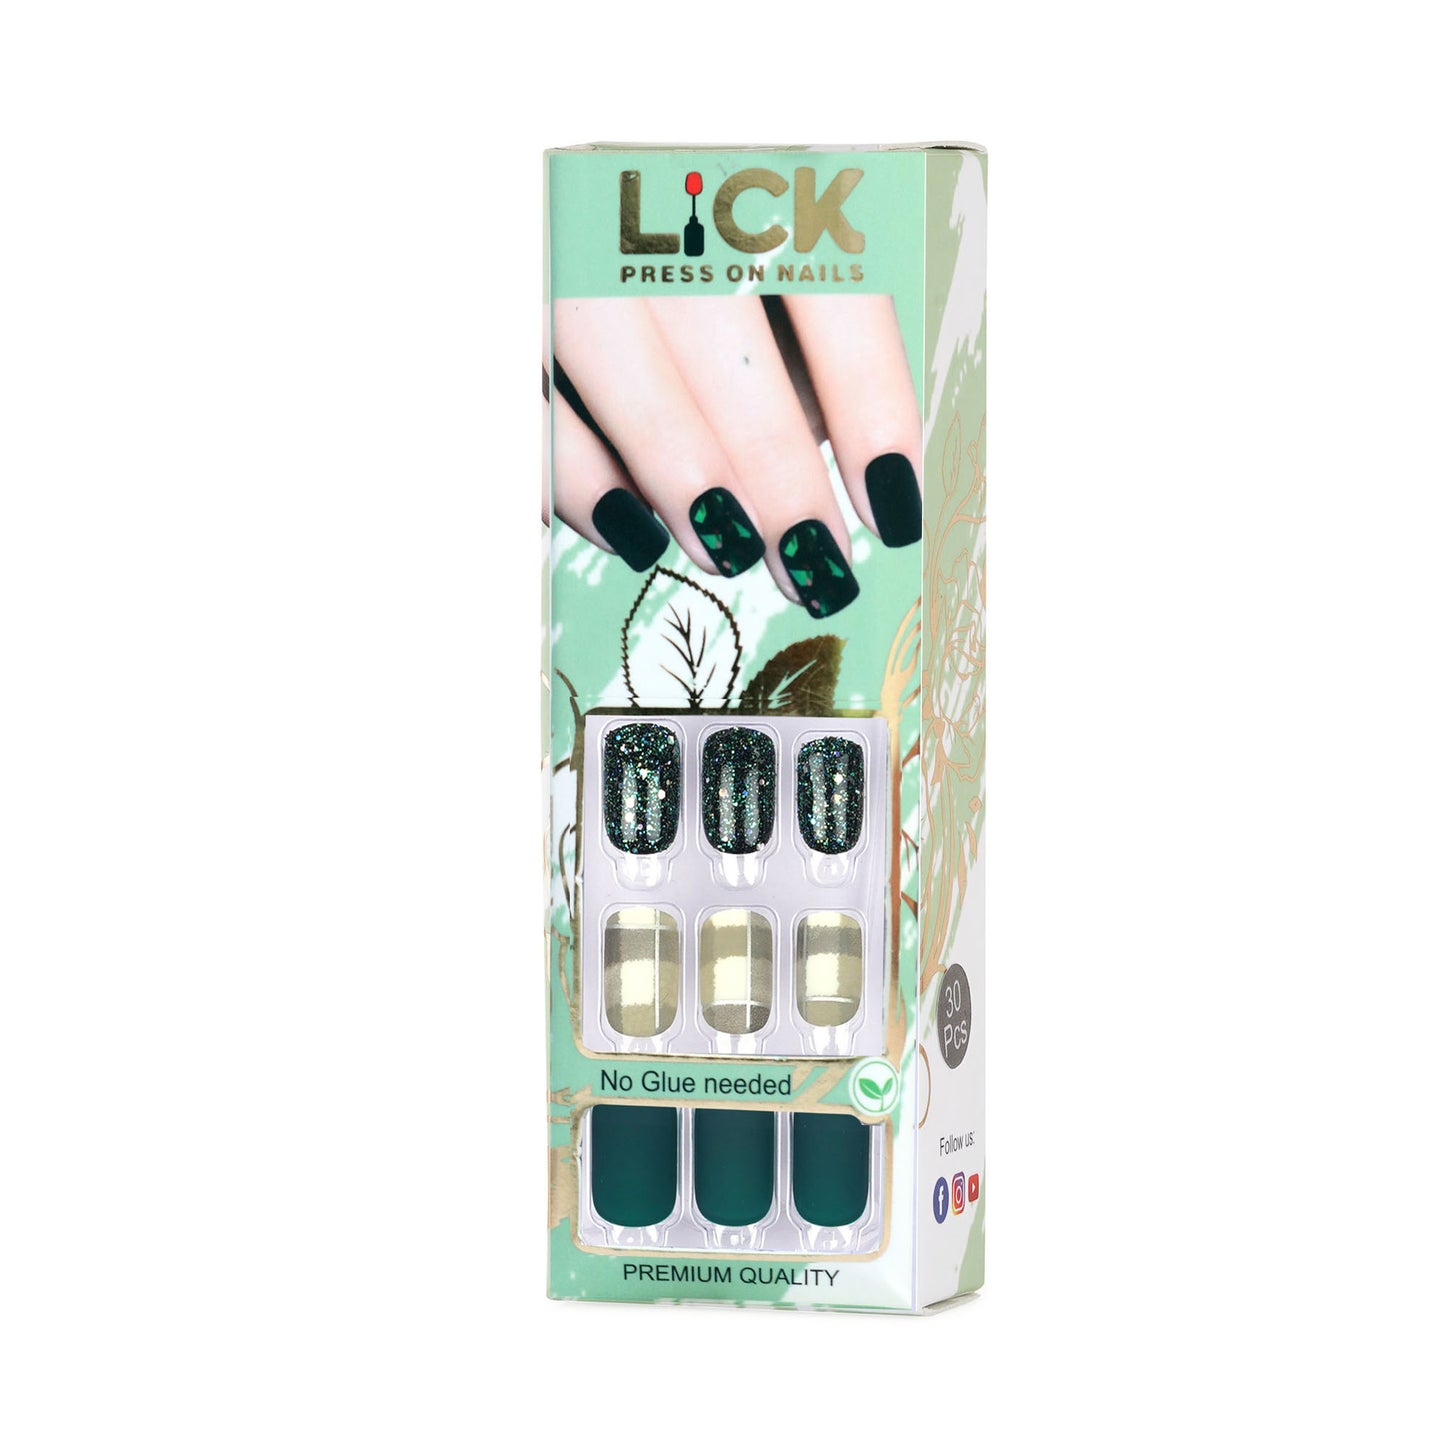 LICK NAILS Green Glitter with Checkered print Press on Nails